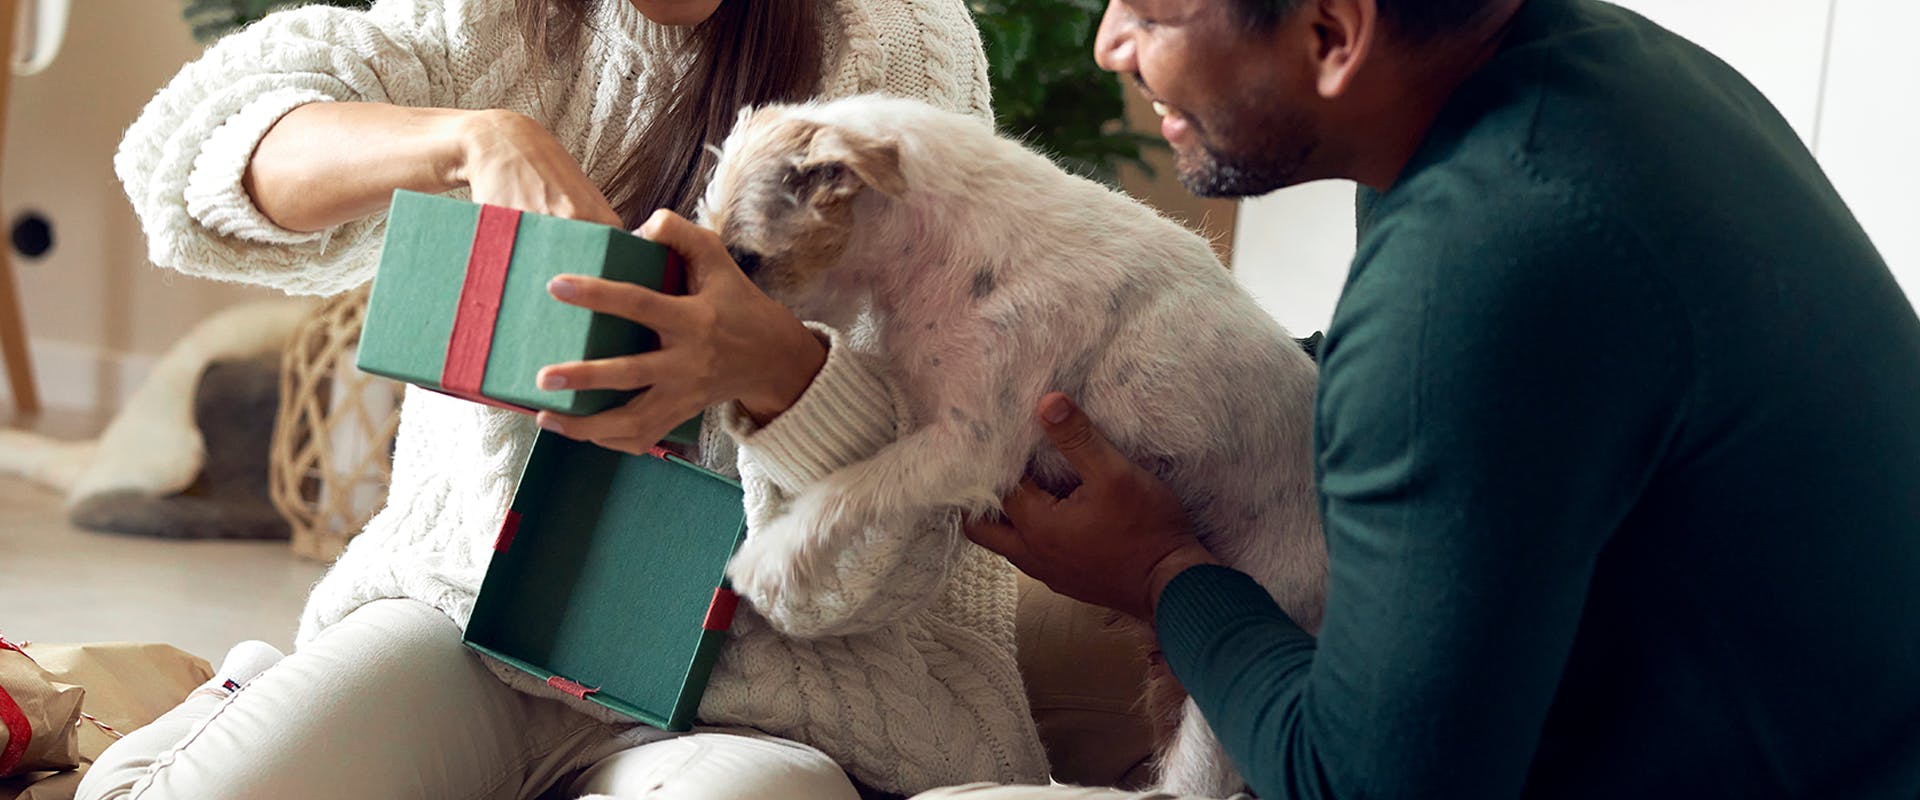 A man and a woman opening a gift, a dog sticking its head inside the giftbox